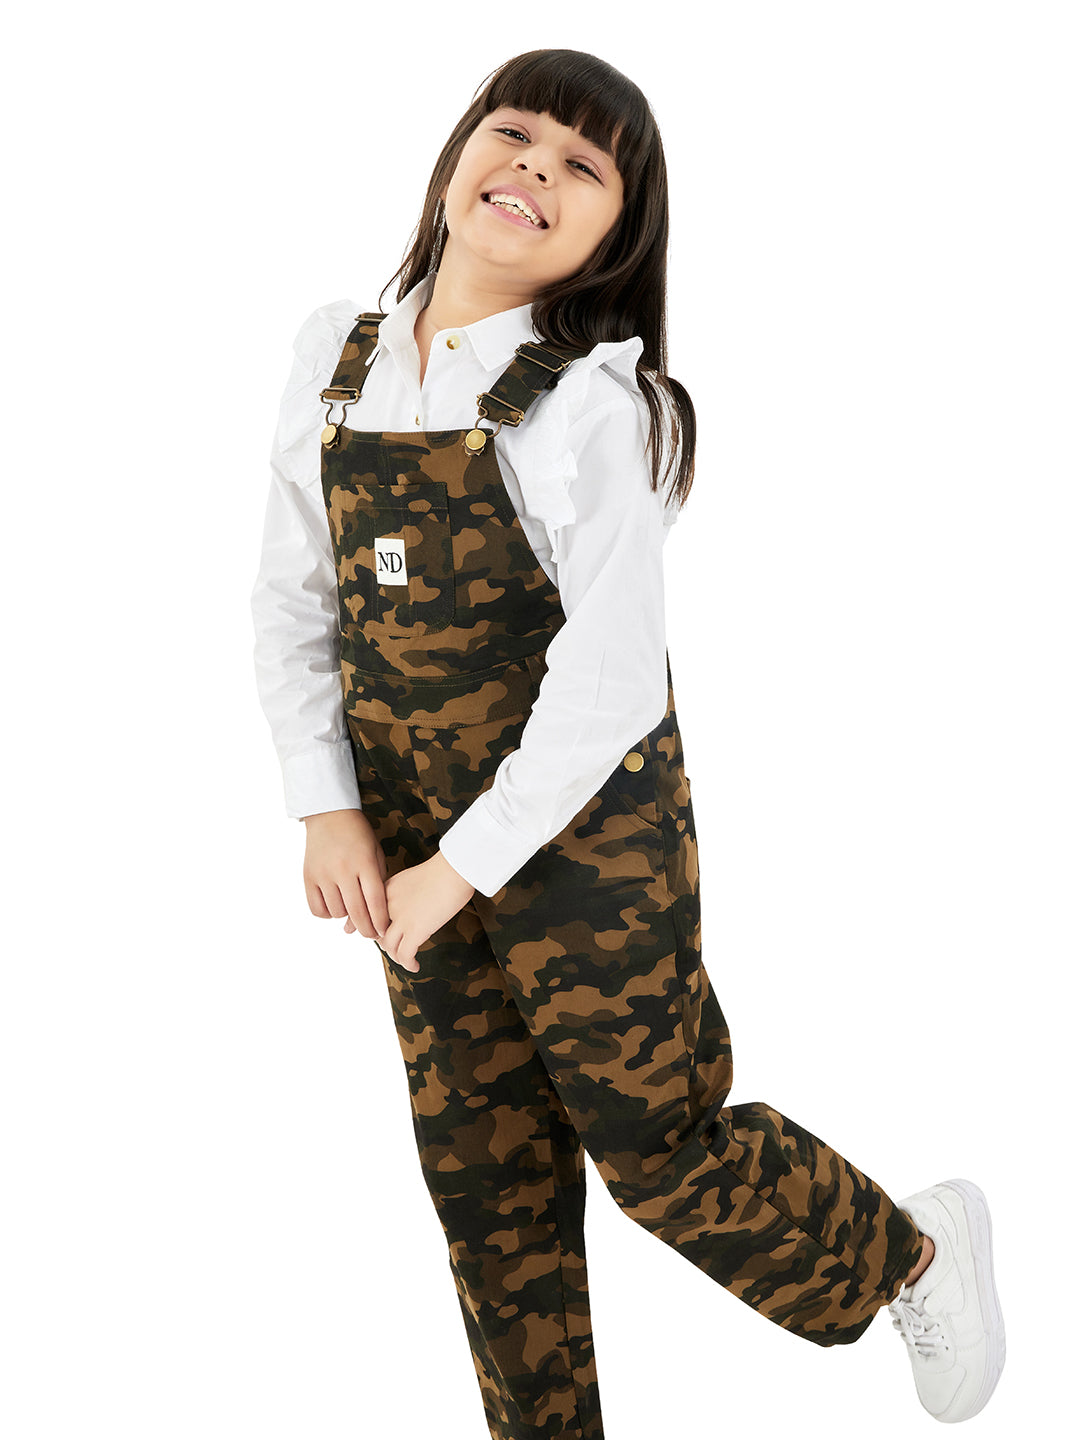 Naughty Dungaree® Full Length Camouflage Cotton Dungaree - Girls